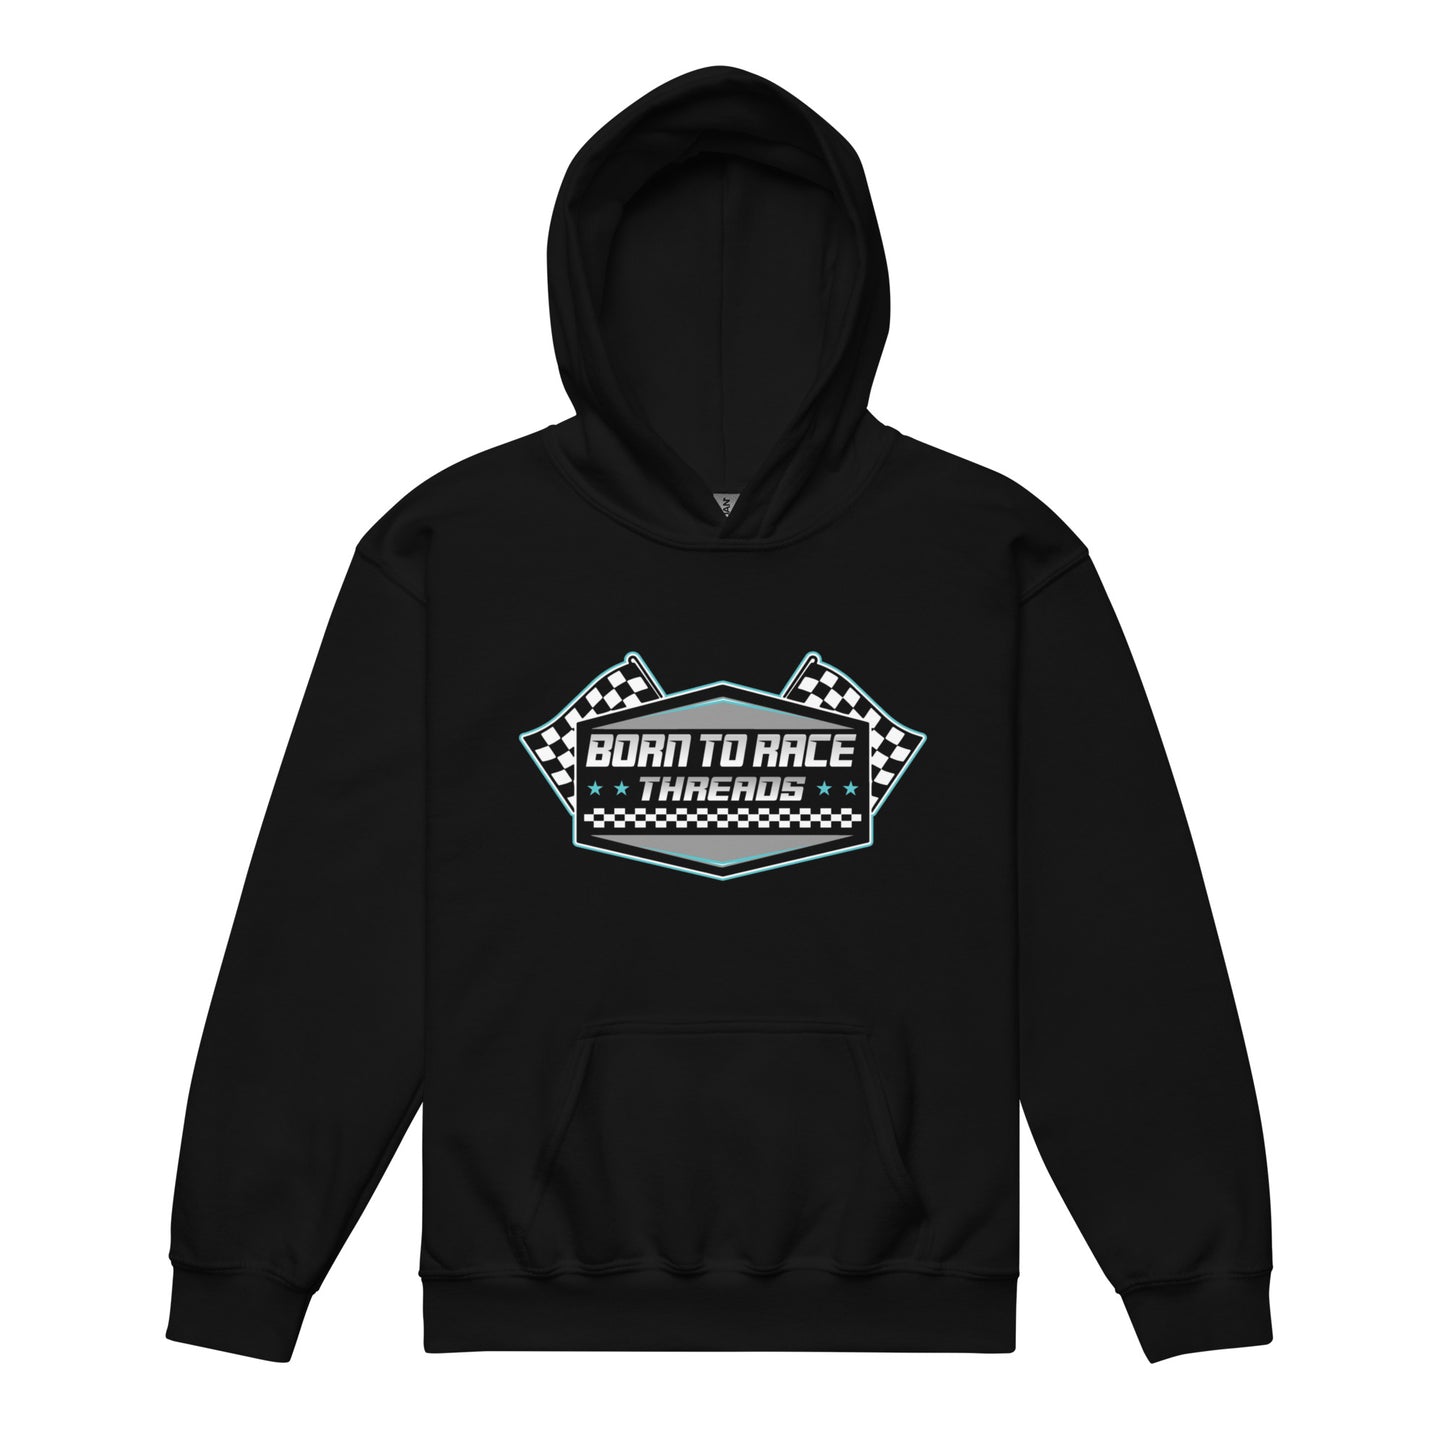 Born to Race Threads Checkered Flag Kids Hoodie